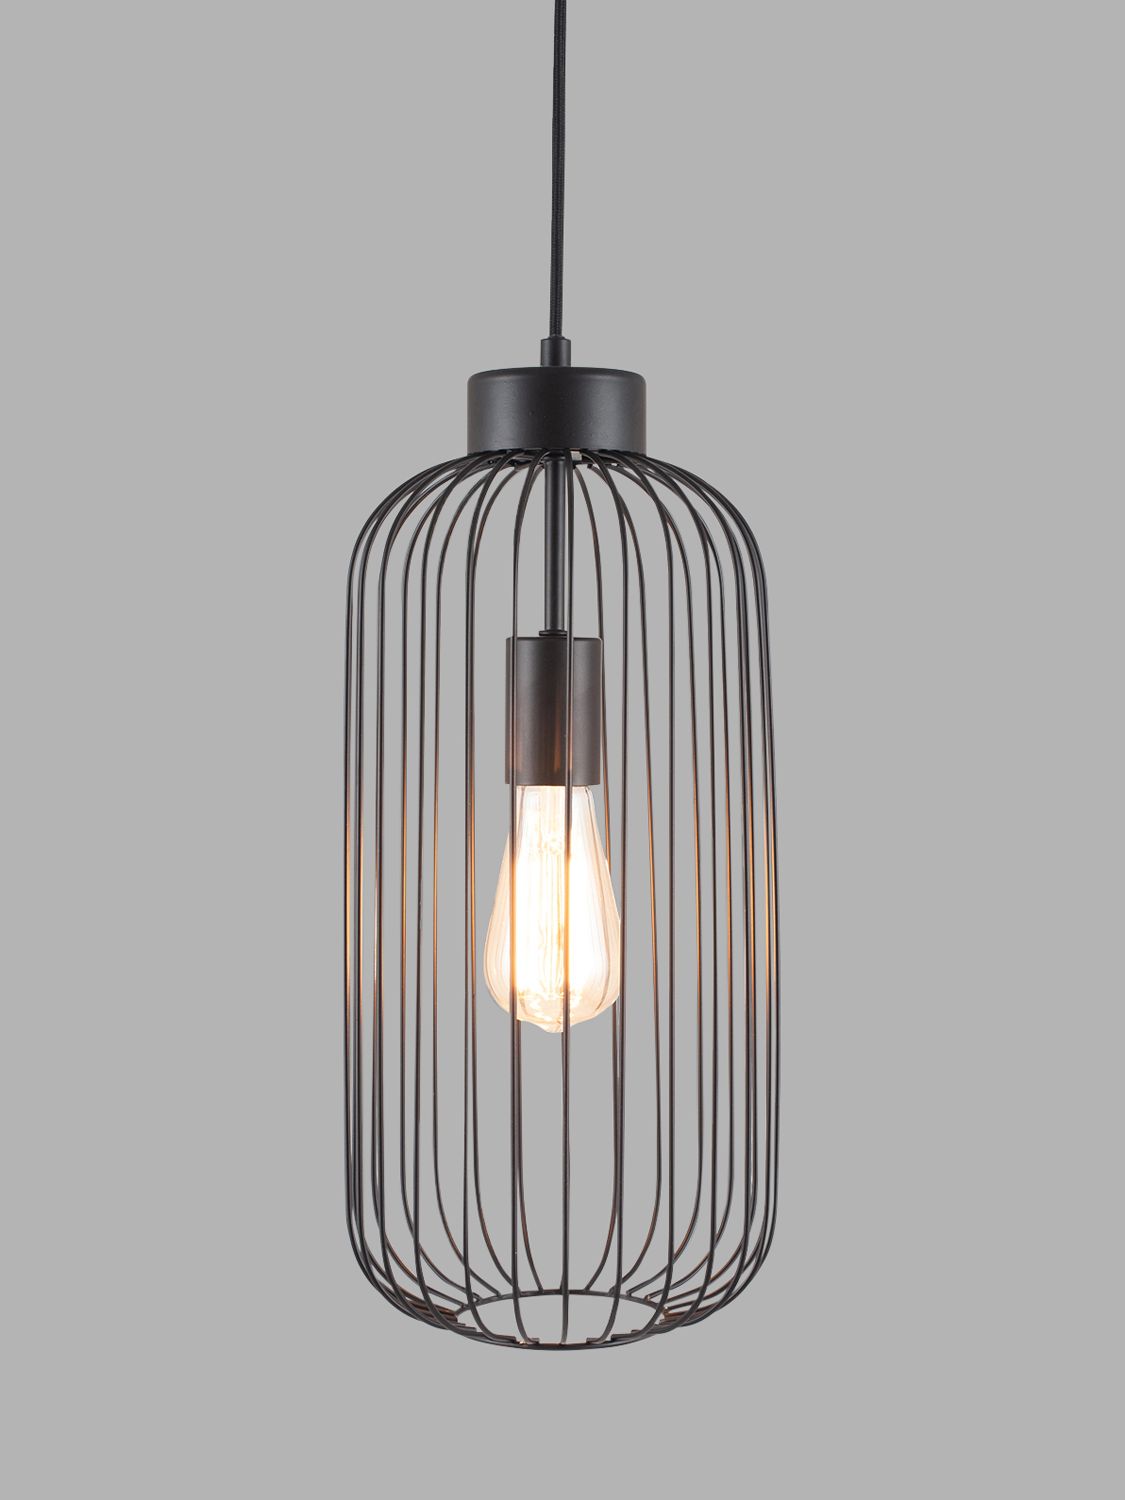 Photo of Pacific lifestyle tall metal wire ceiling light black